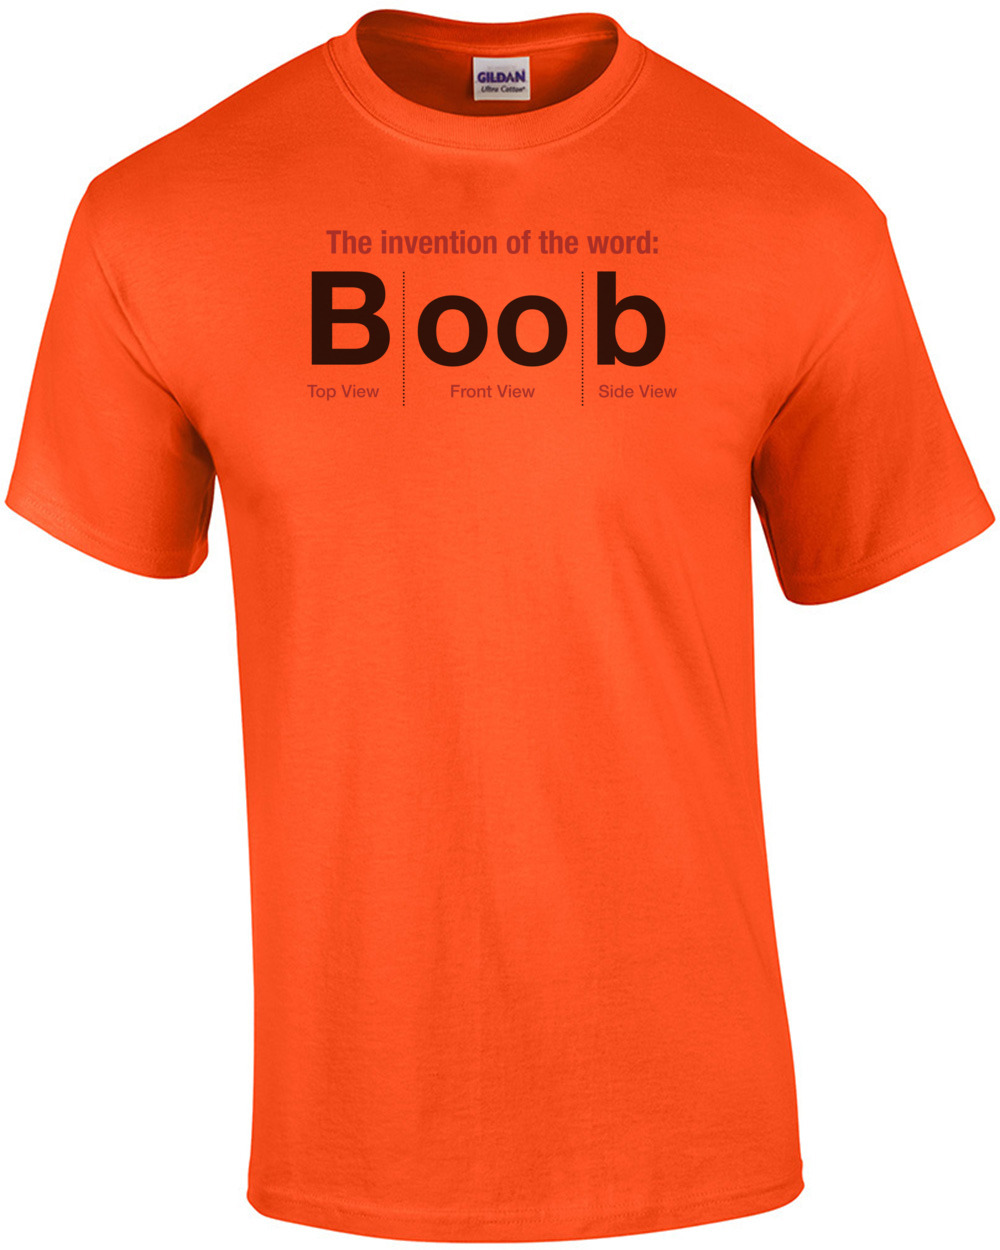 The Invention of The Word Boob T-Shirt